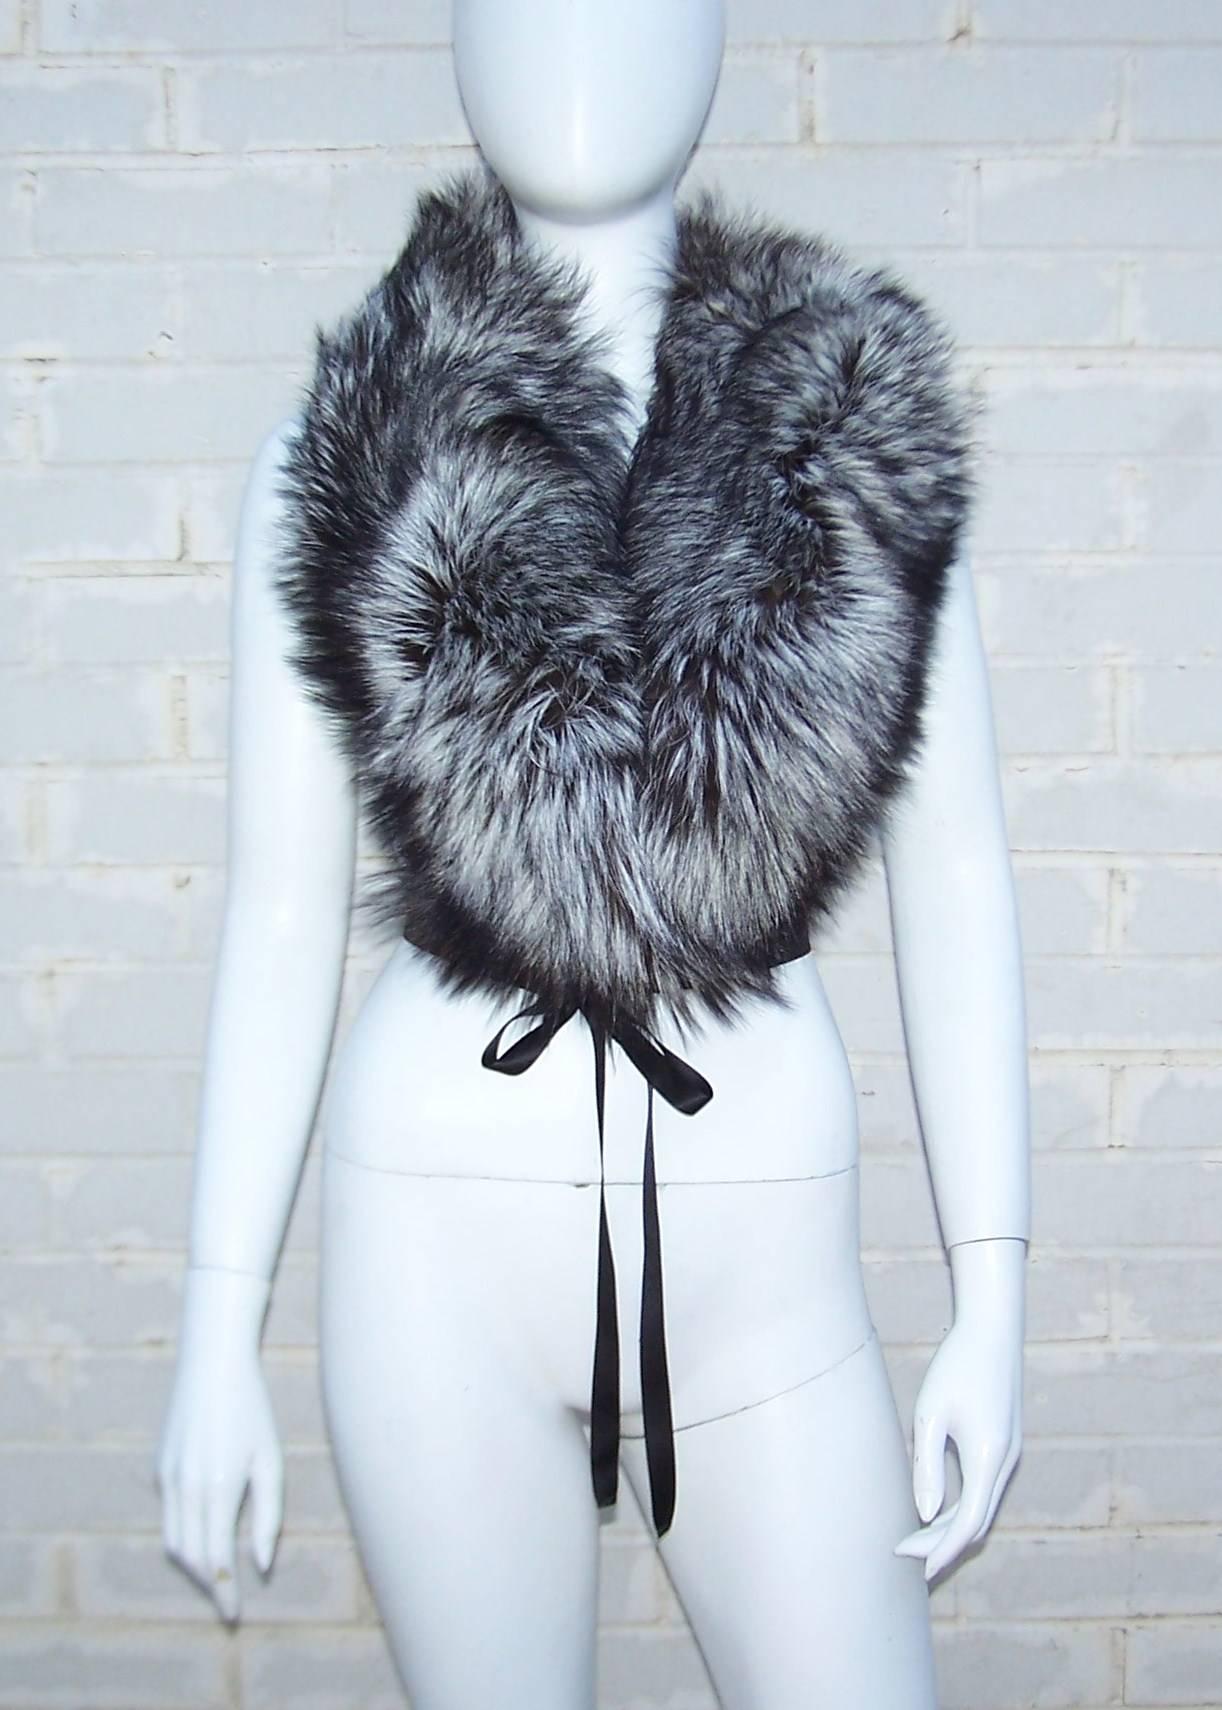 This is the perfect fur accessory for a winter wardrobe.  The versatile size of the collar and length of the black satin tie enables you to add it to coats, jackets, sweaters and just about anything for warmth and glamour.  The silver tip fox fur